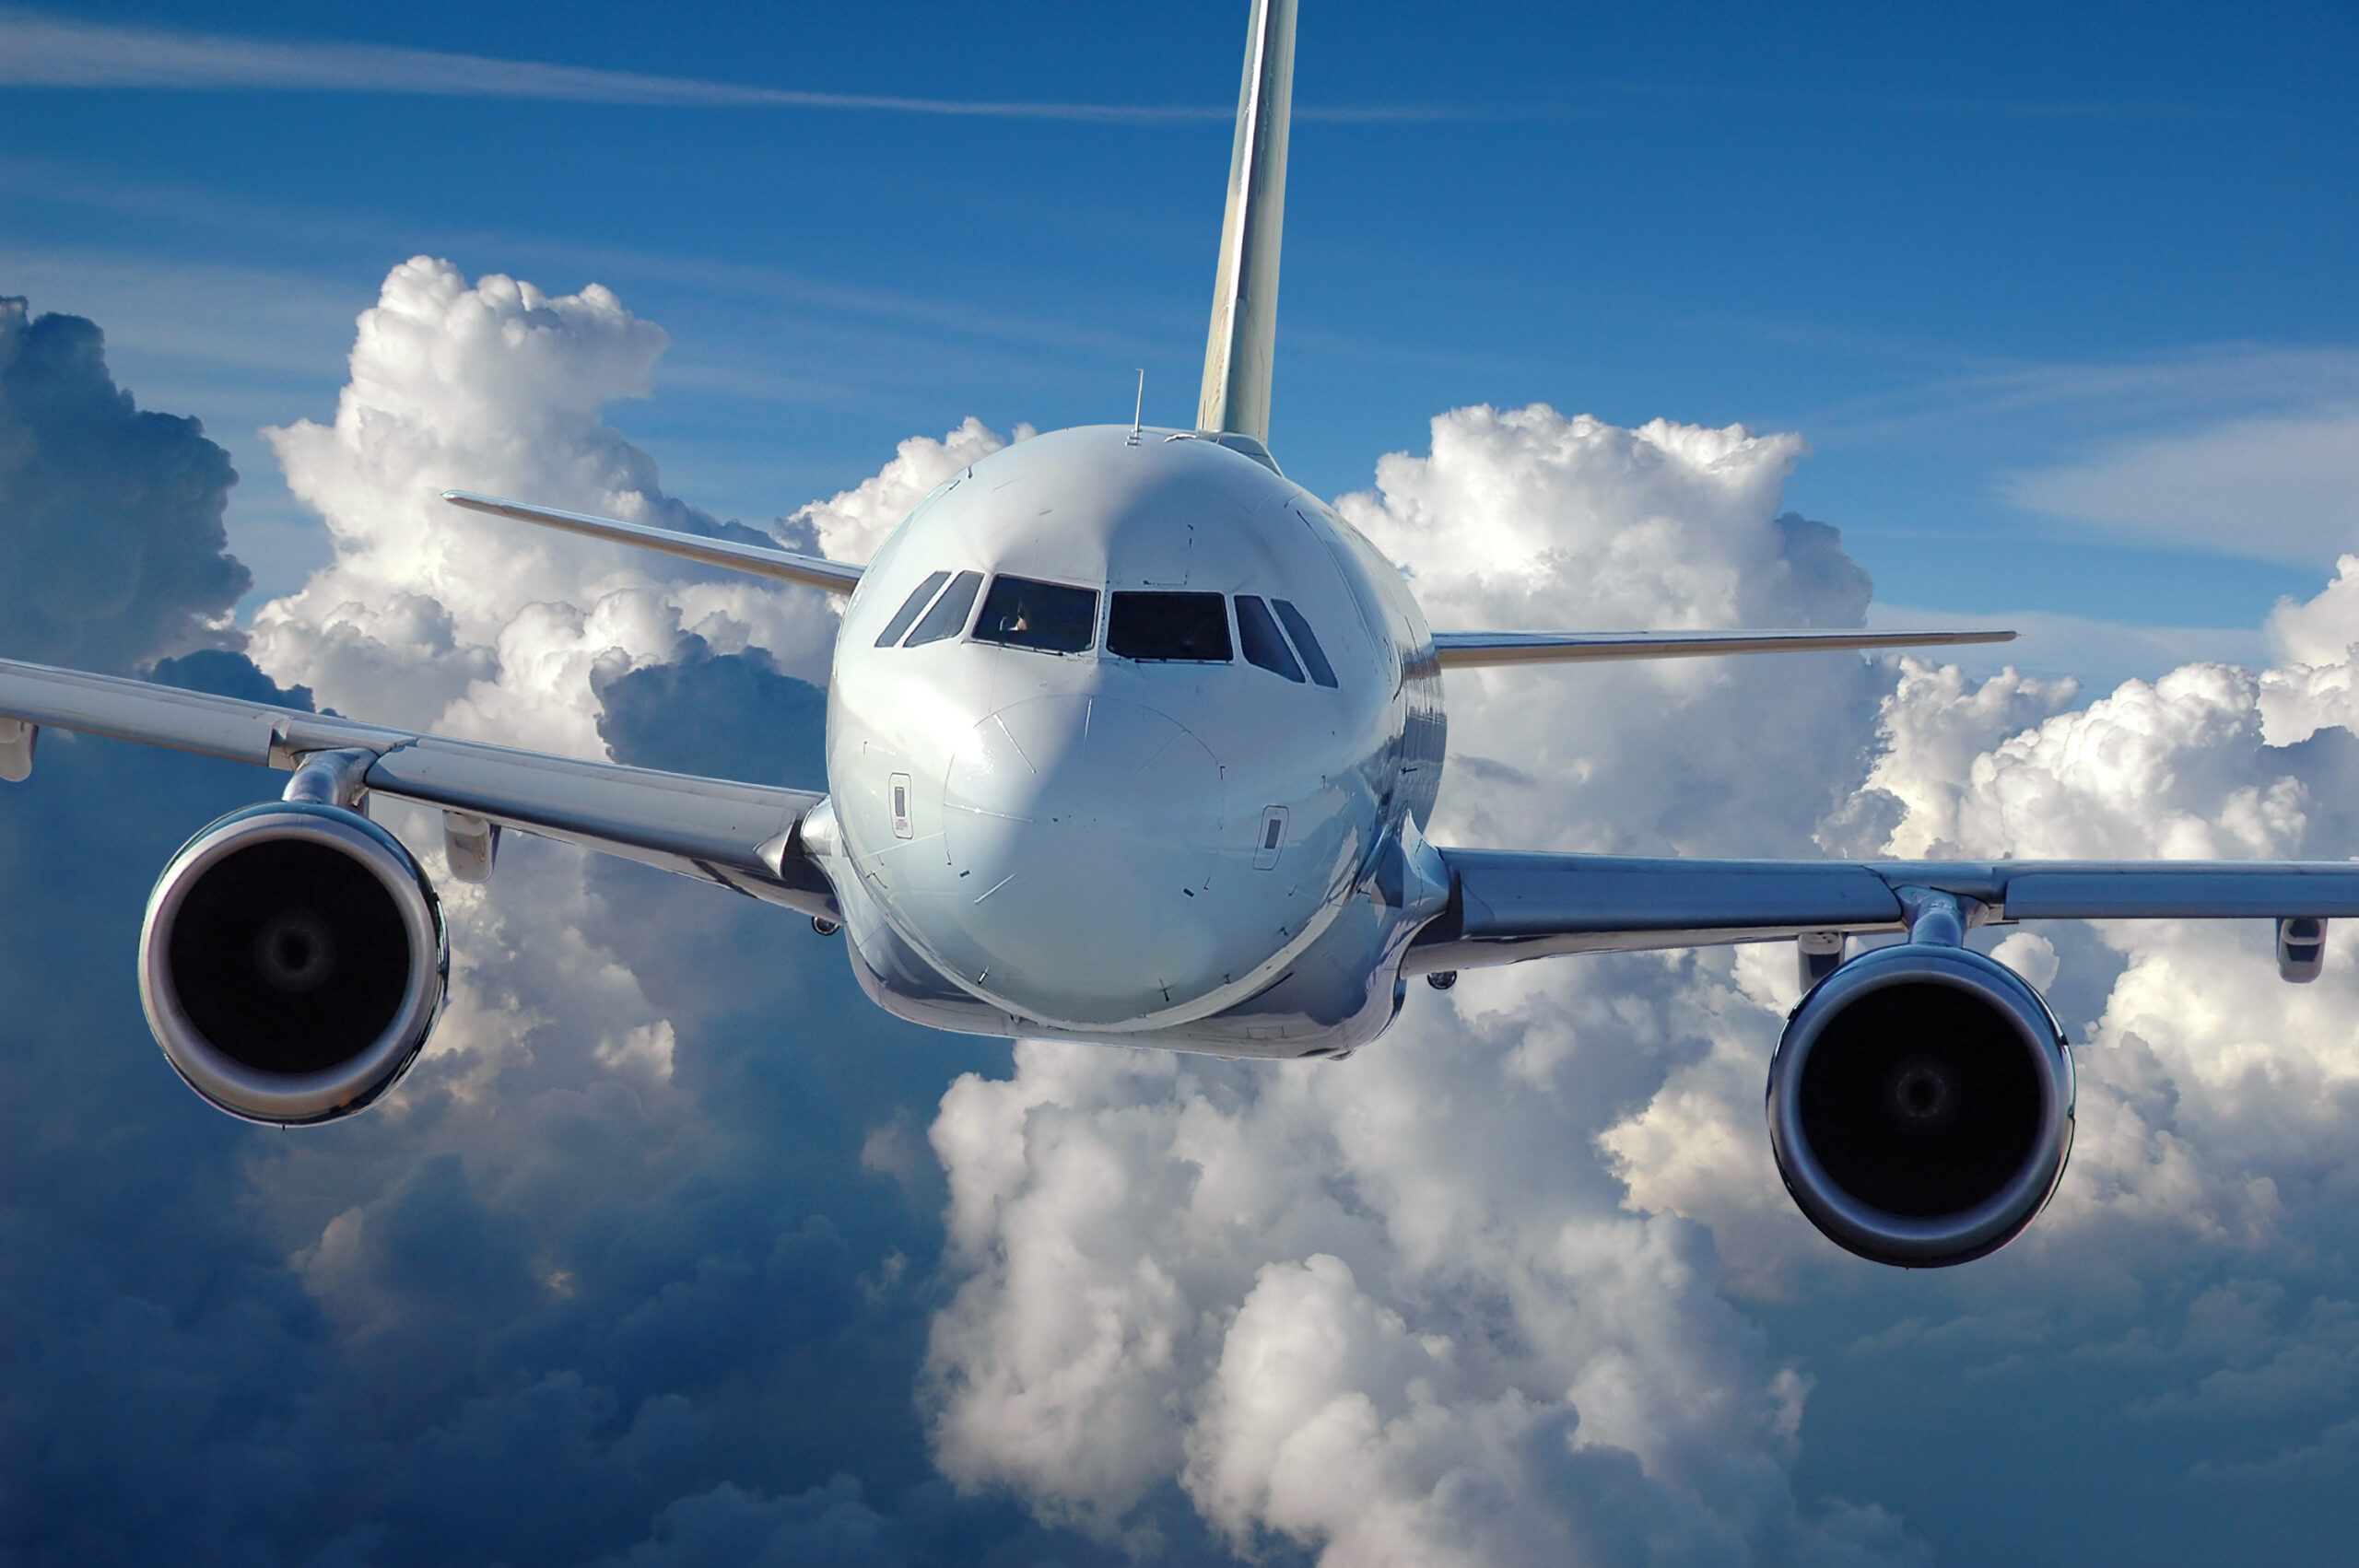 Front view of a commercial airplane flying in front of a cloud-filled background.